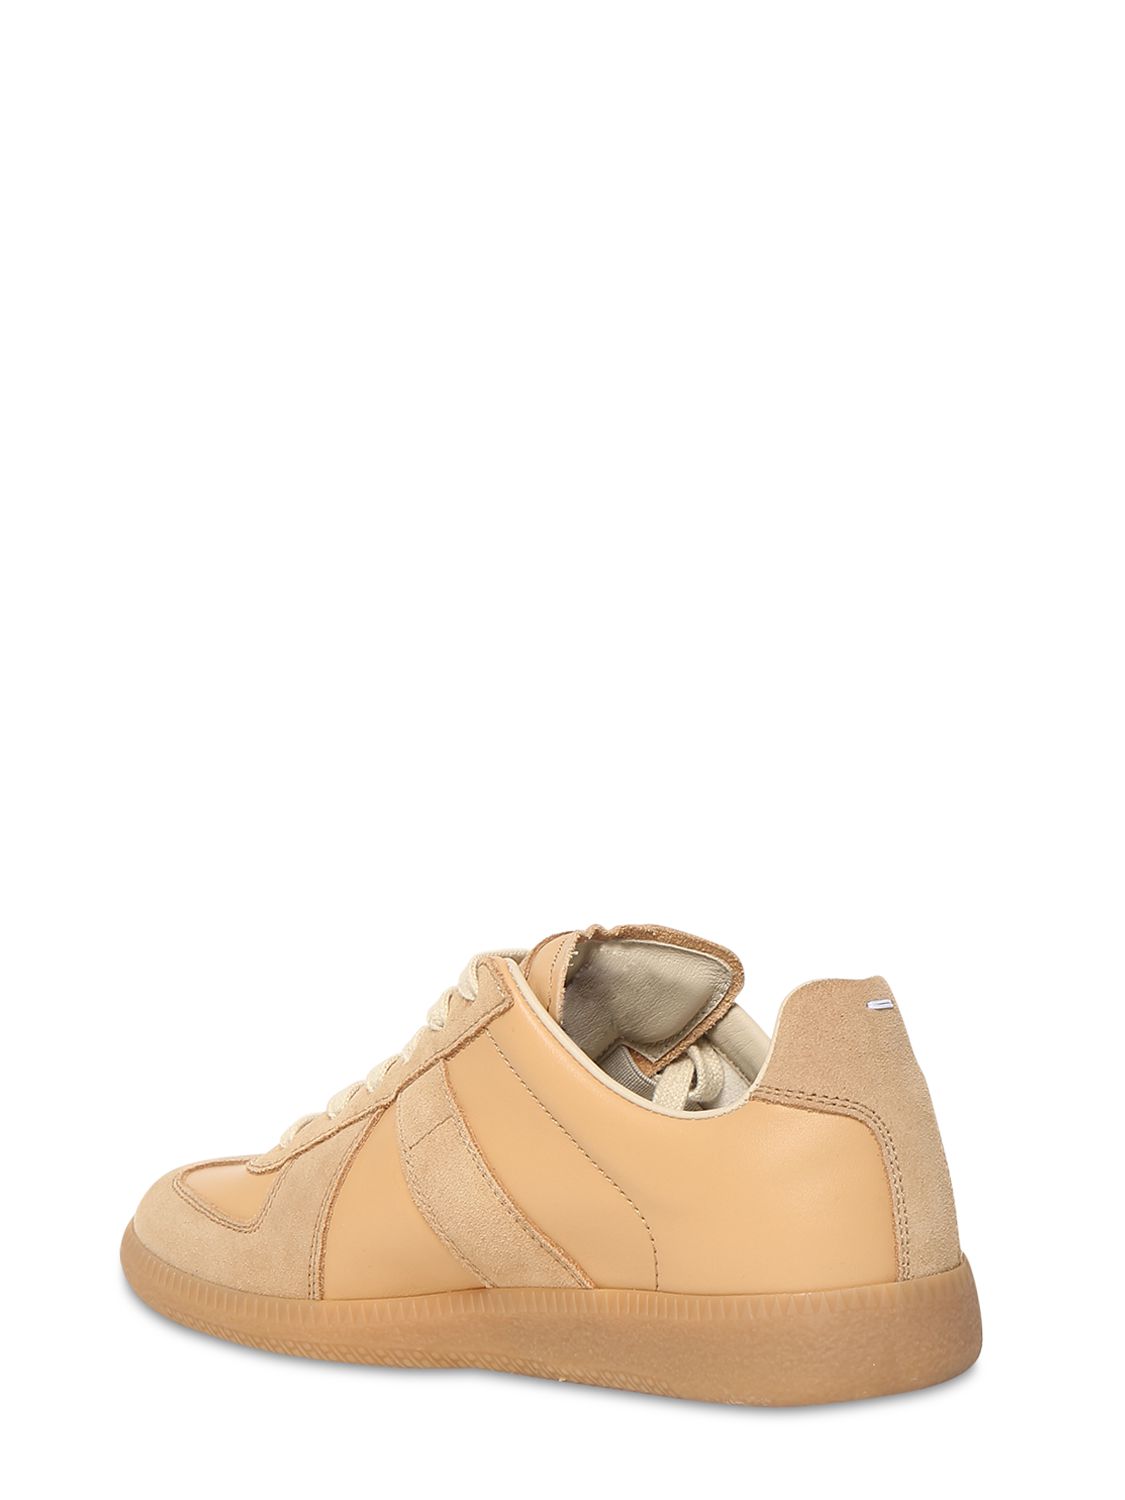 Shop Maison Margiela 20mm Replica Leather & Suede Sneakers In Camel